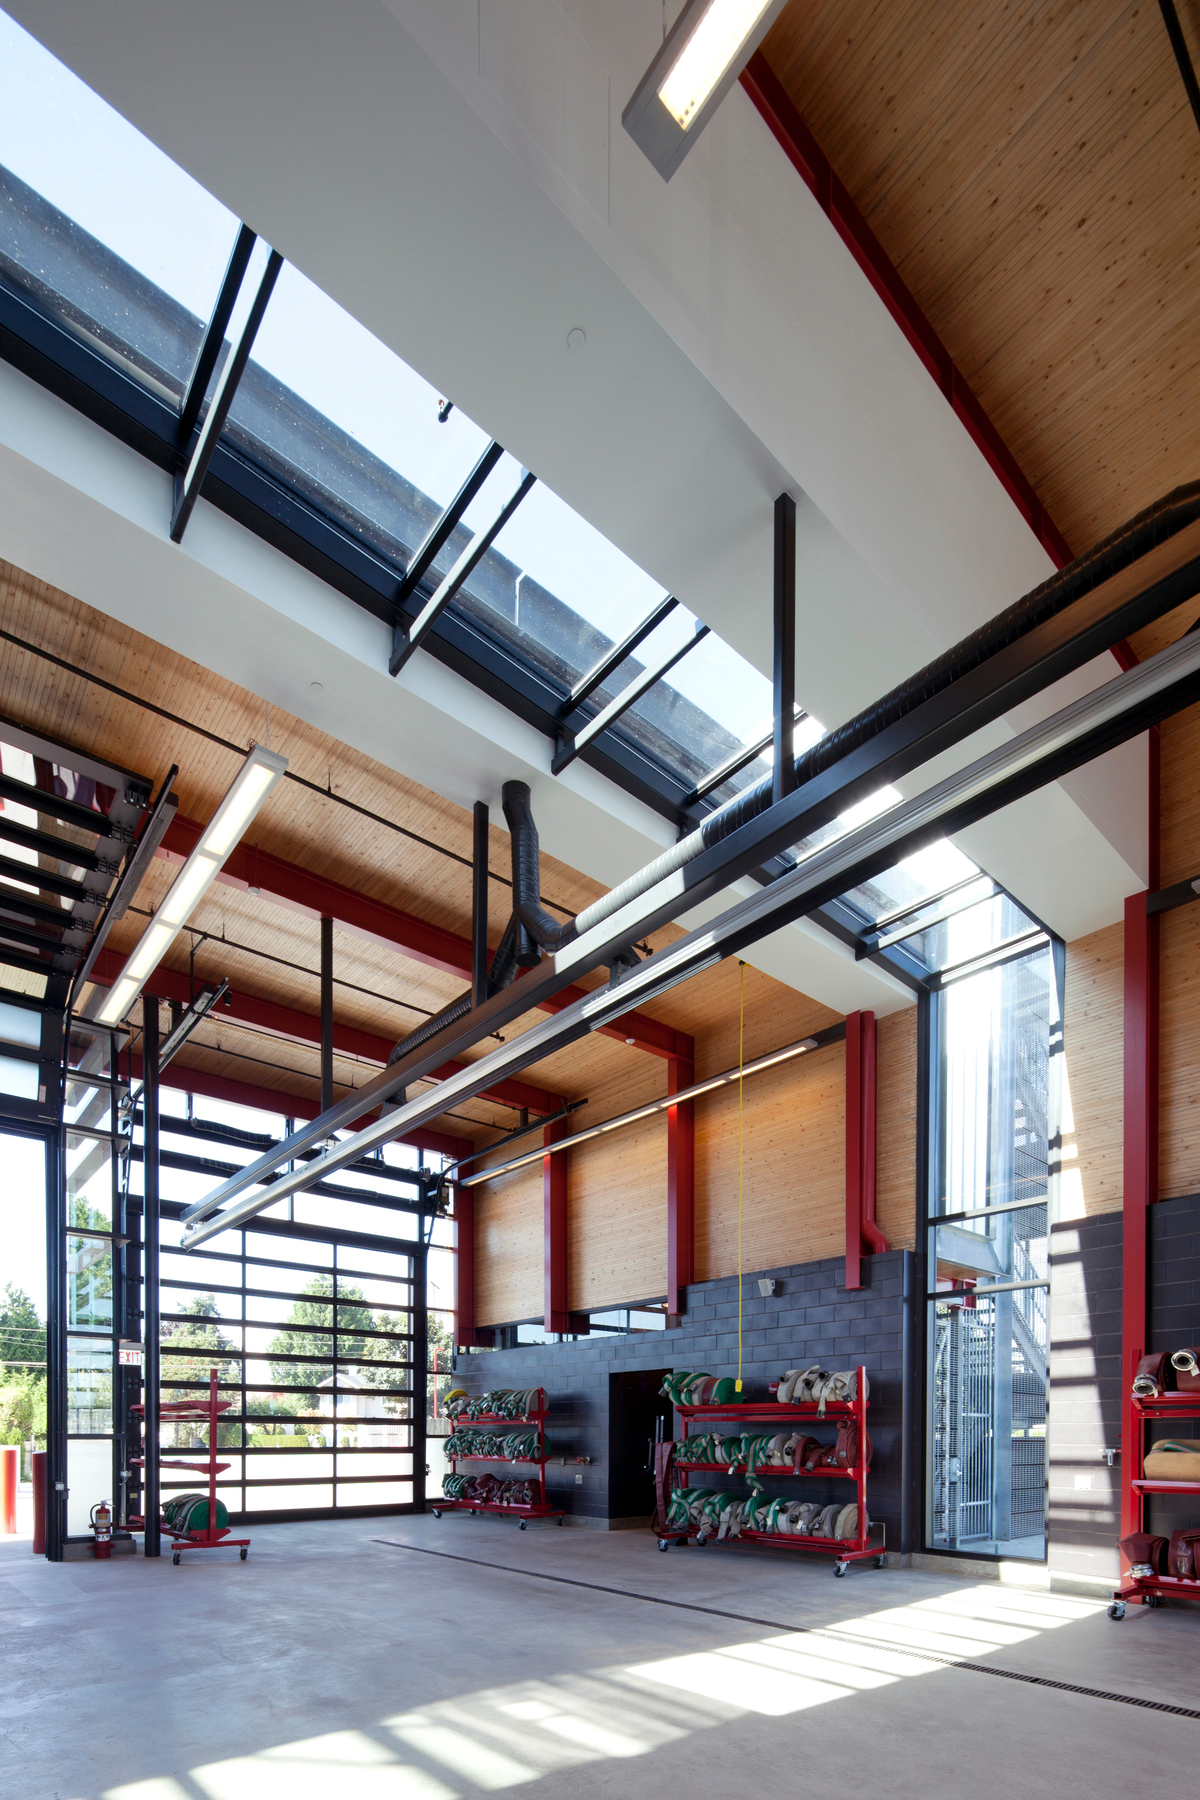 Nail laminated timber (NLT) solid-wood decking, used for the roof and wall panels, is shown in this interior vehicle bay image of the low rise hybrid Steveston Fire Hall No. 2